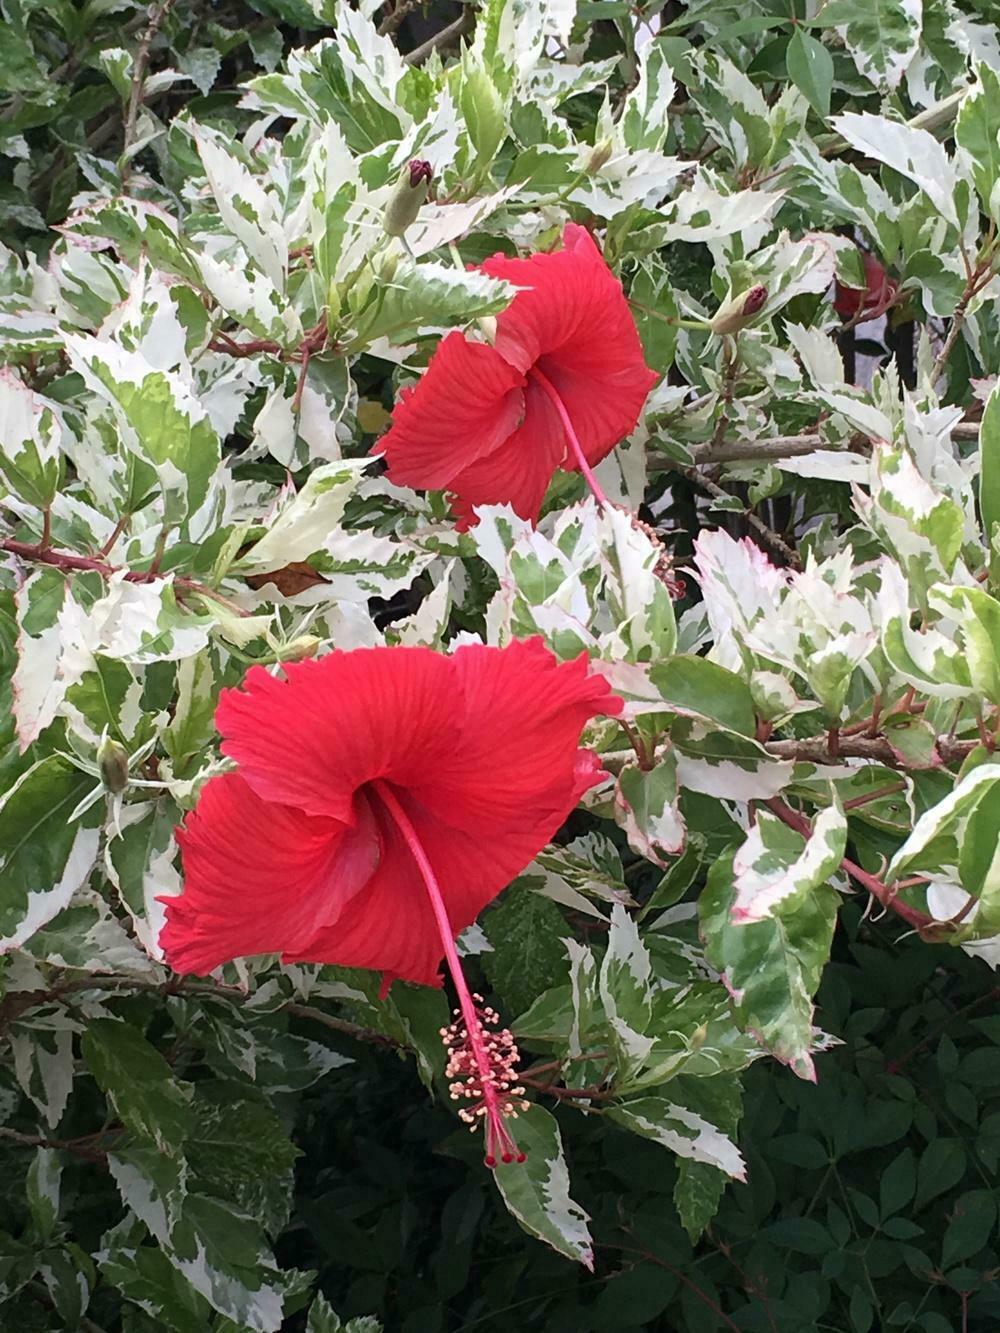 ***SNOW QUEEN*** VARIEGATED Rooted Exotic Tropical Hibiscus Plant ***AKA Fancy Hibiscus***